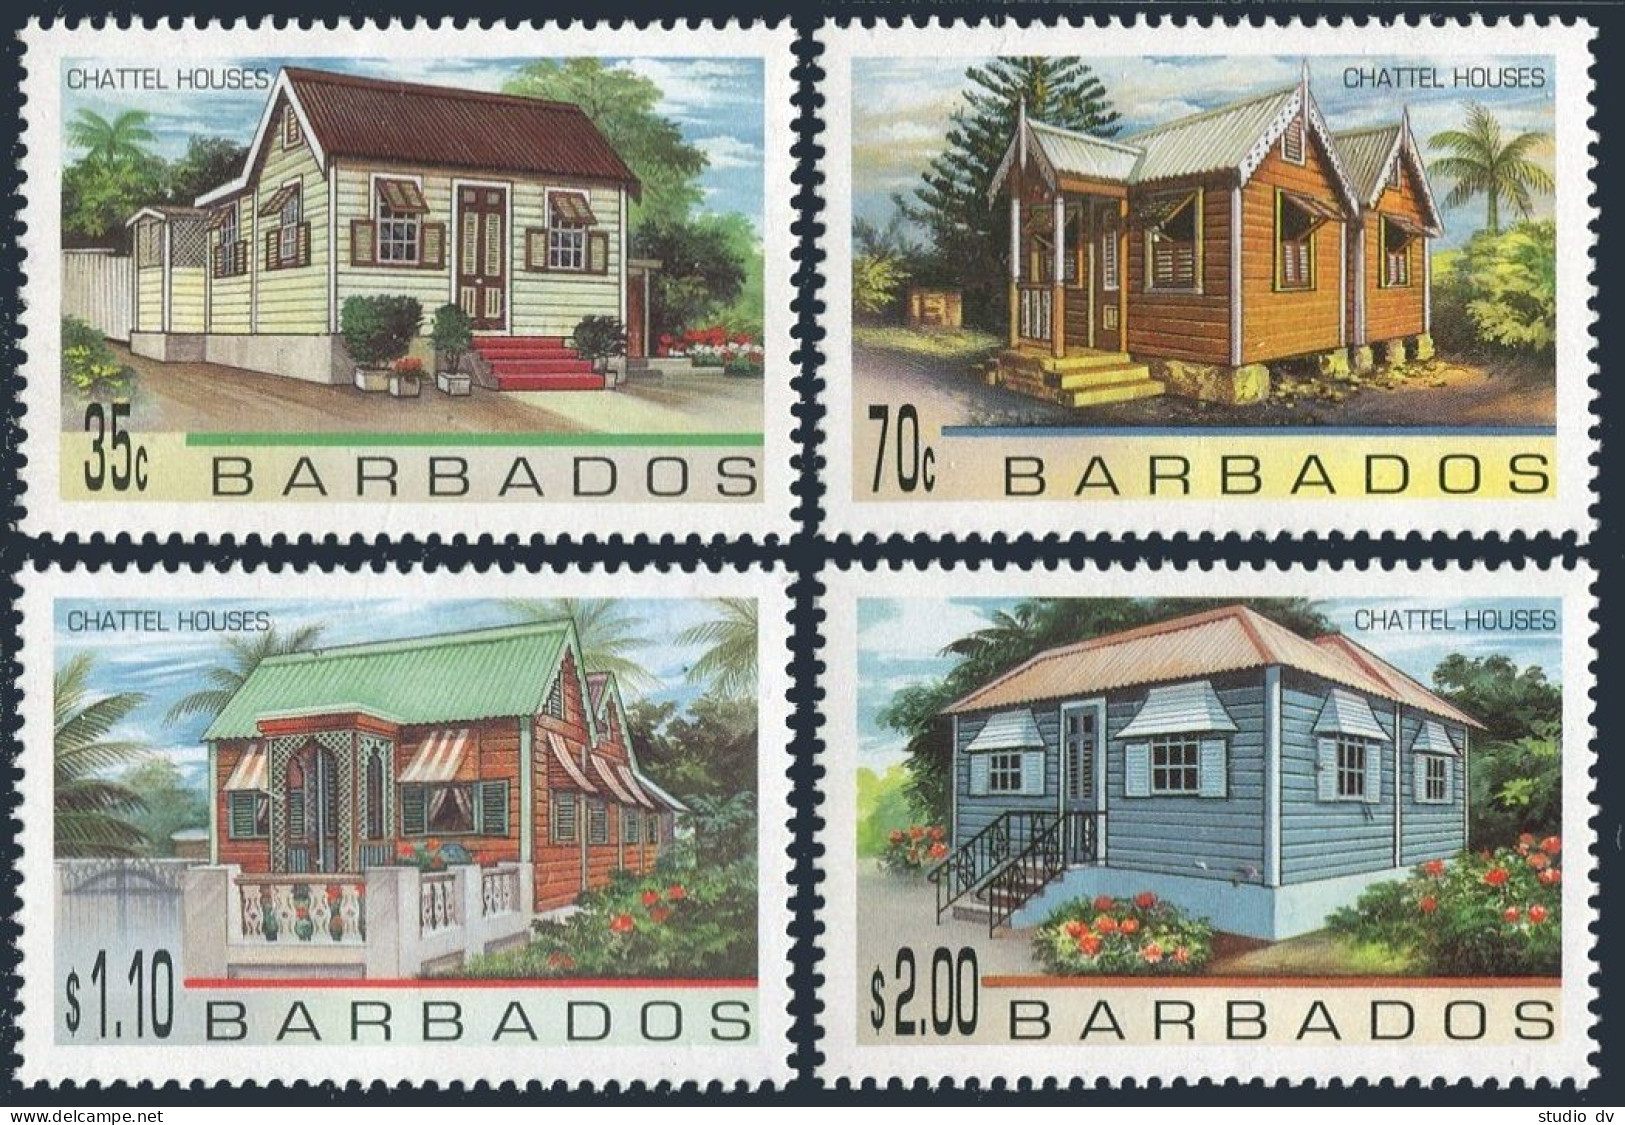 Barbados  922-925, MNH. Michel 902-905. Chattel Houses, 1996. - Barbades (1966-...)